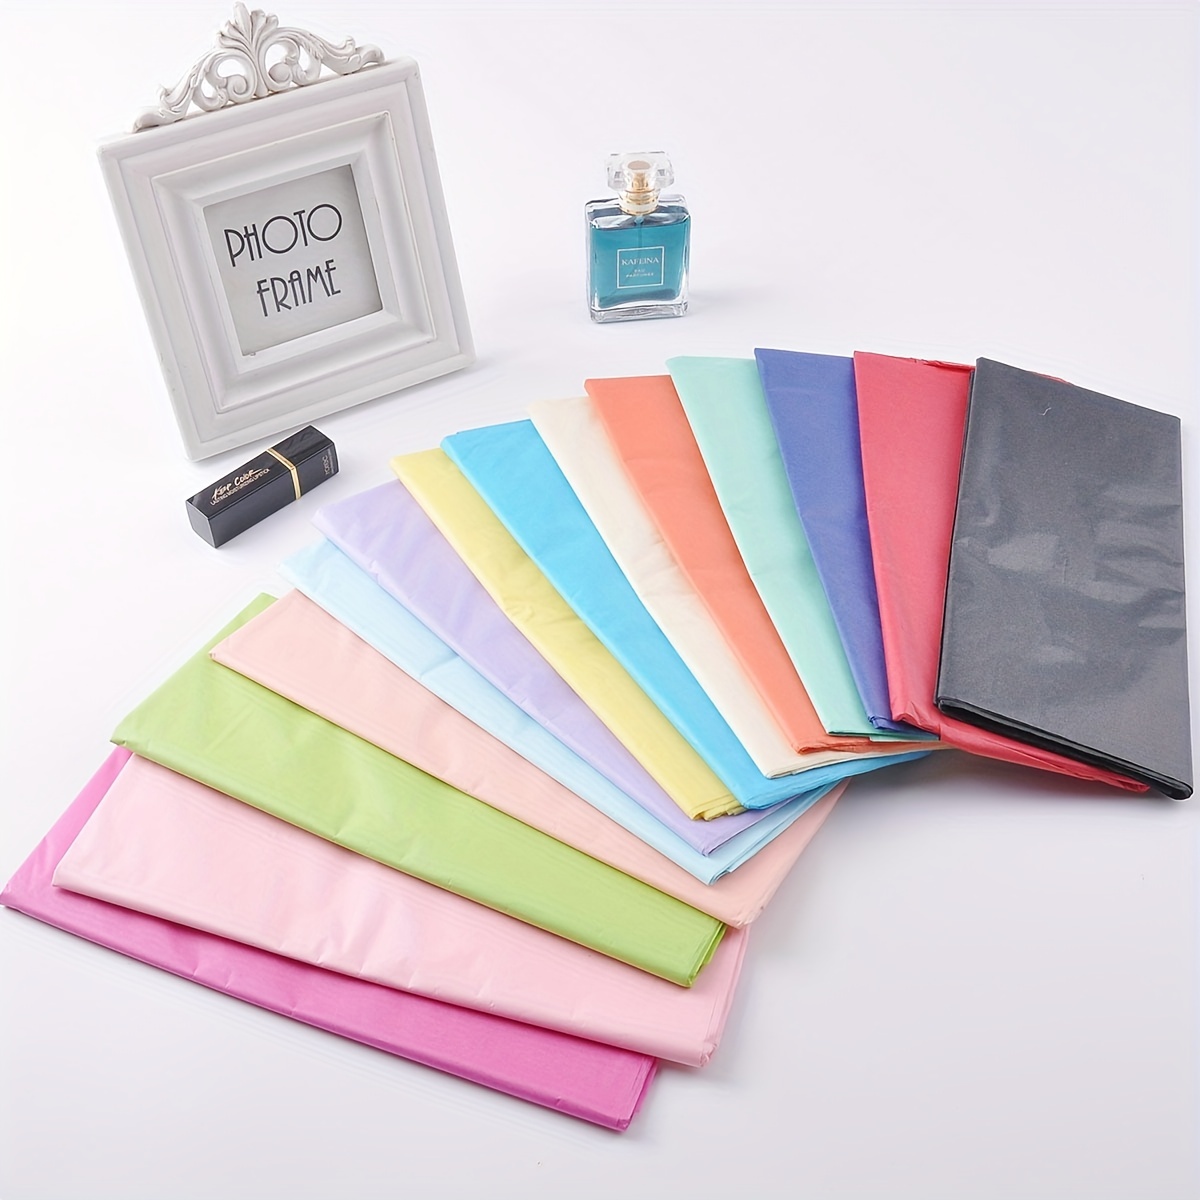 Pearl Matte Paper, Solid Color Pearl Gloss Paper Perfect For